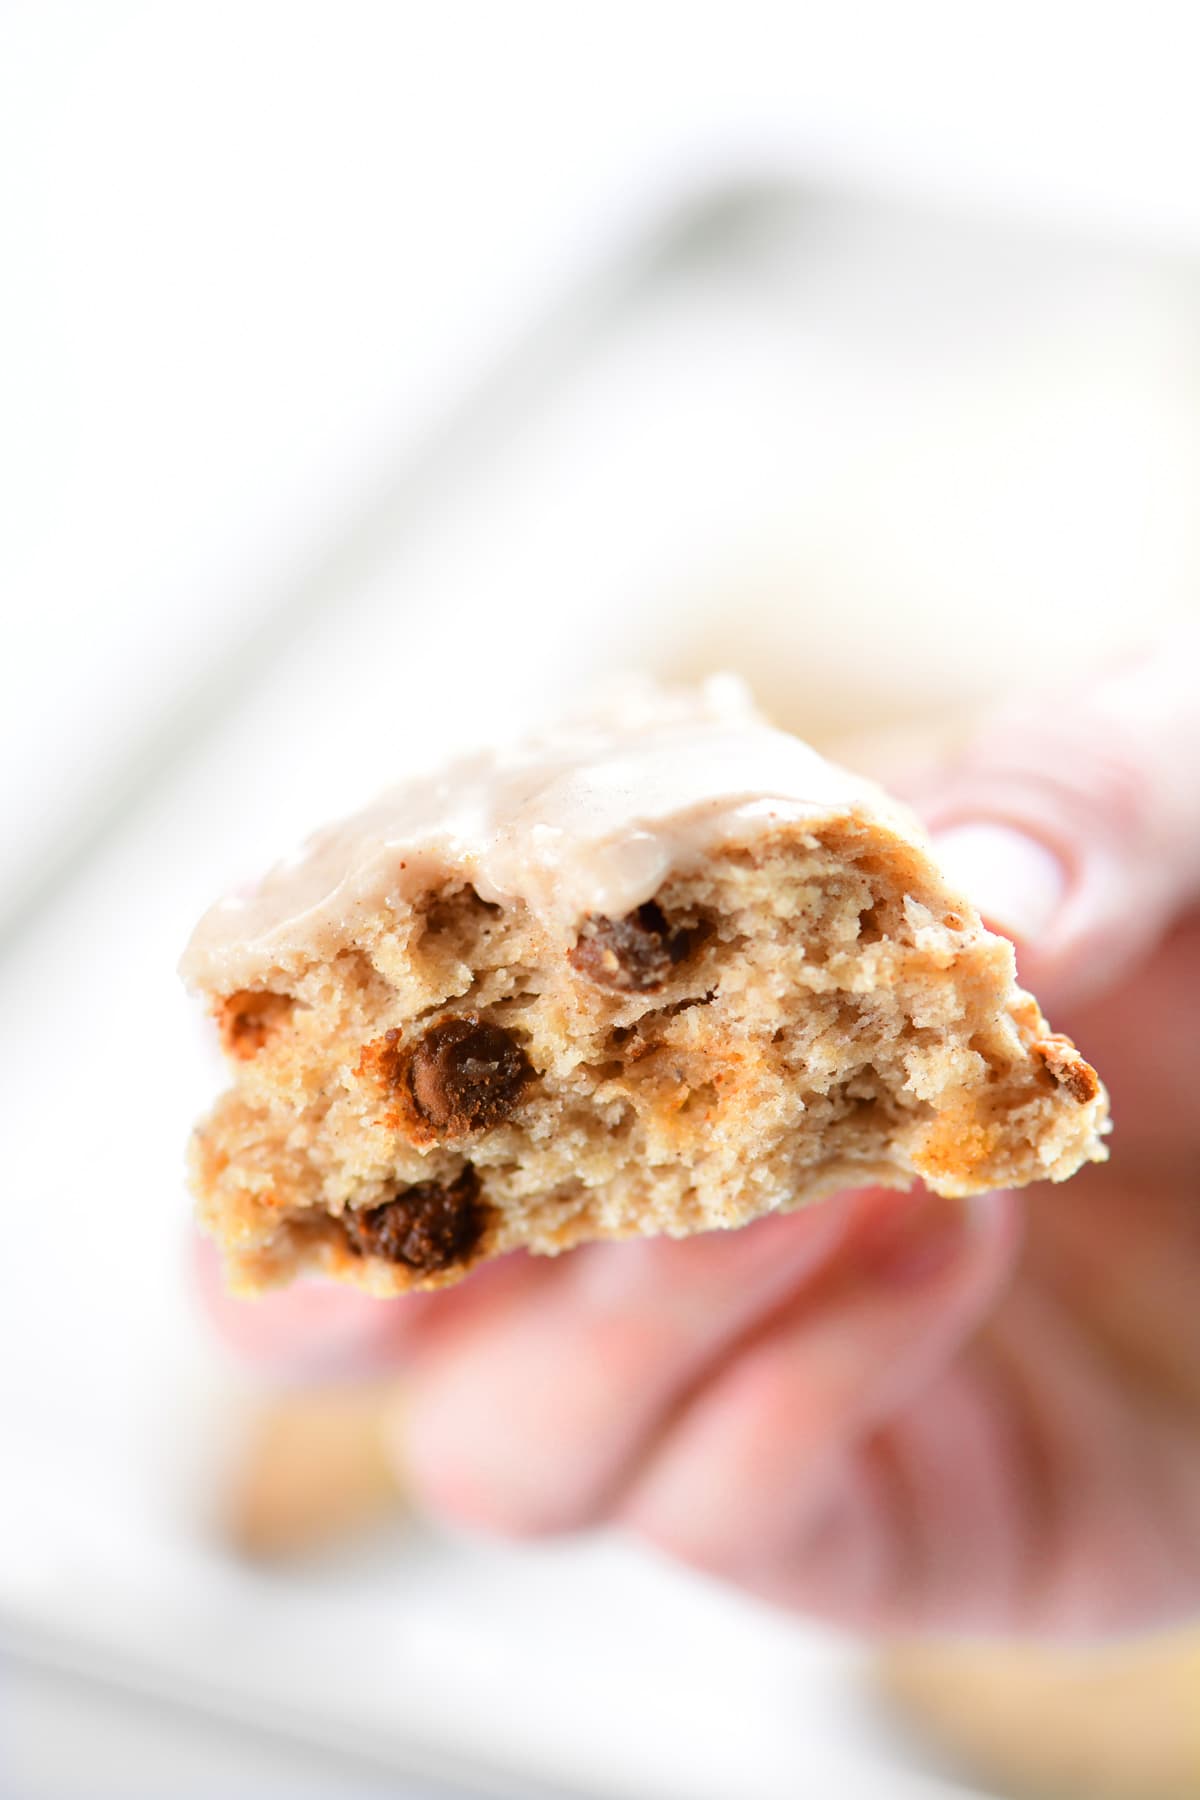 A hand holding a fluffy scone showing the inside.